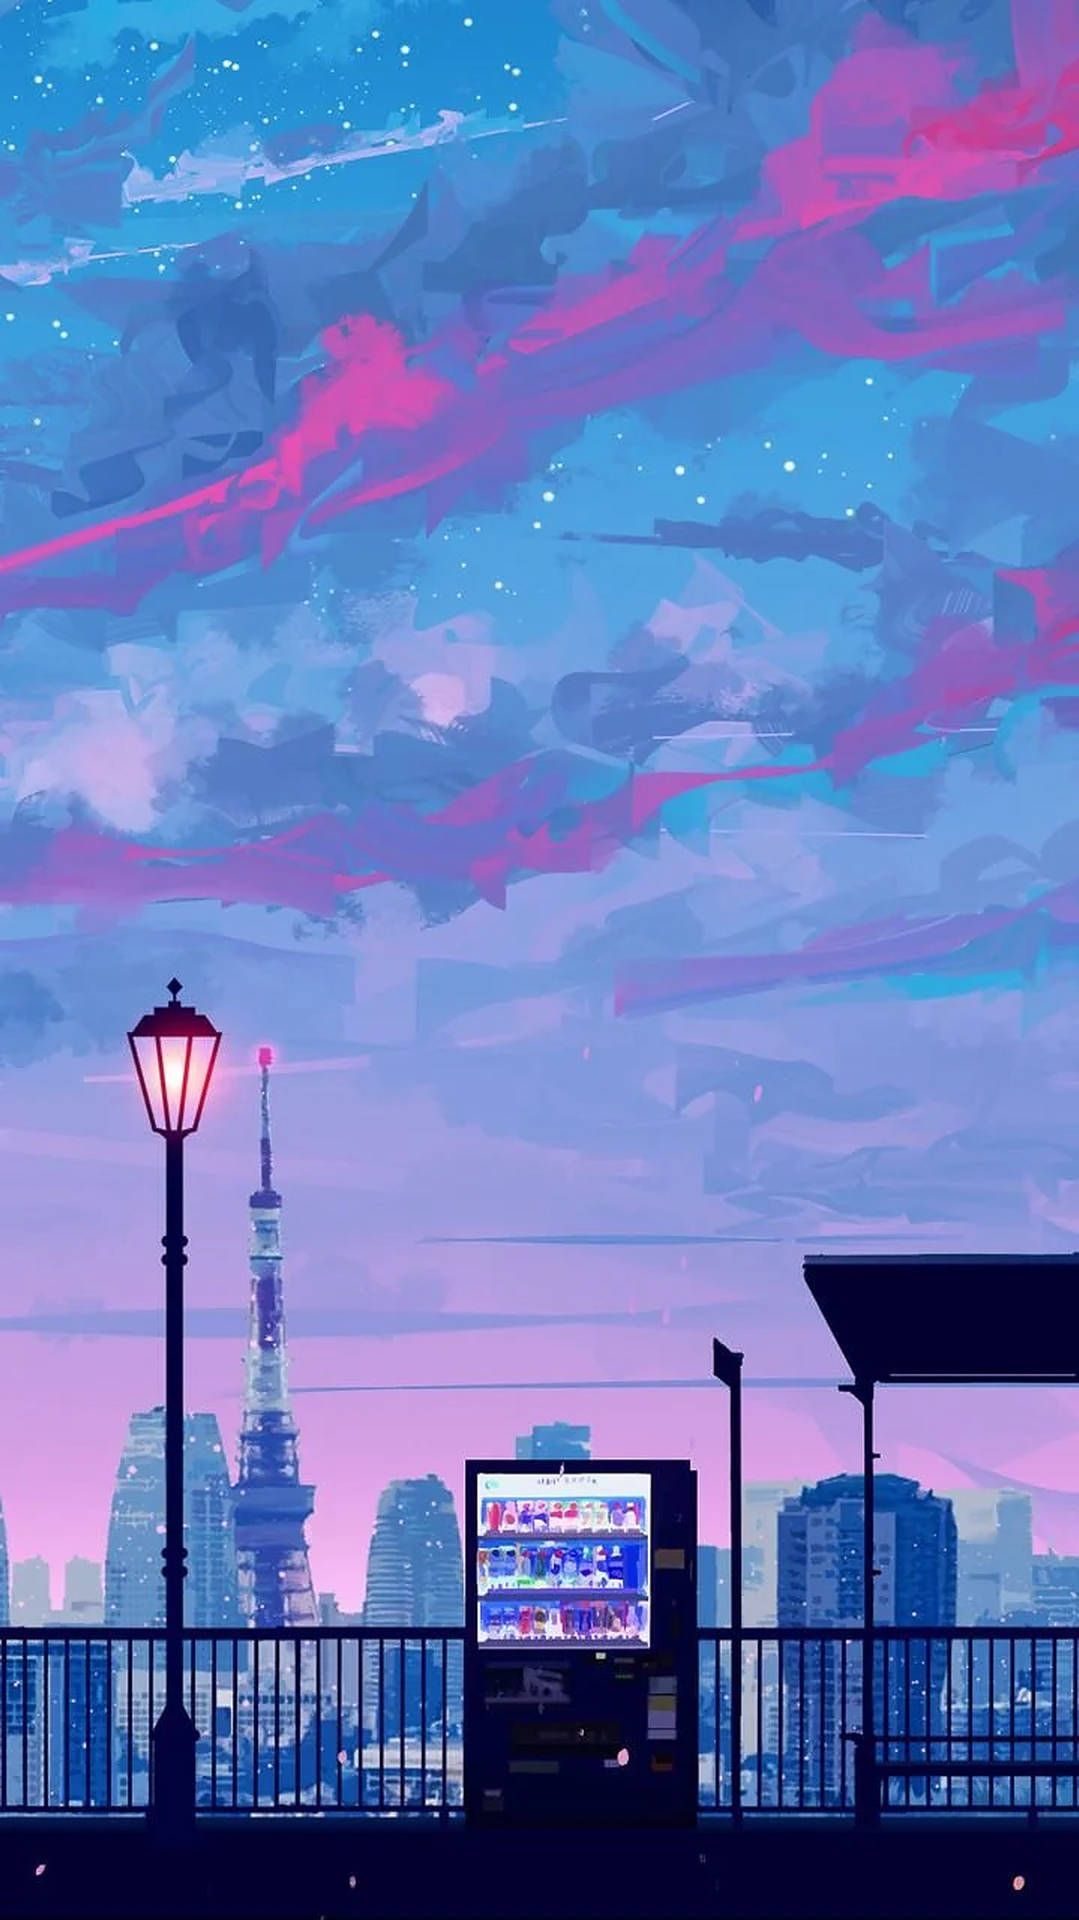 Download Anime City iPhone Aesthetic Wallpaper